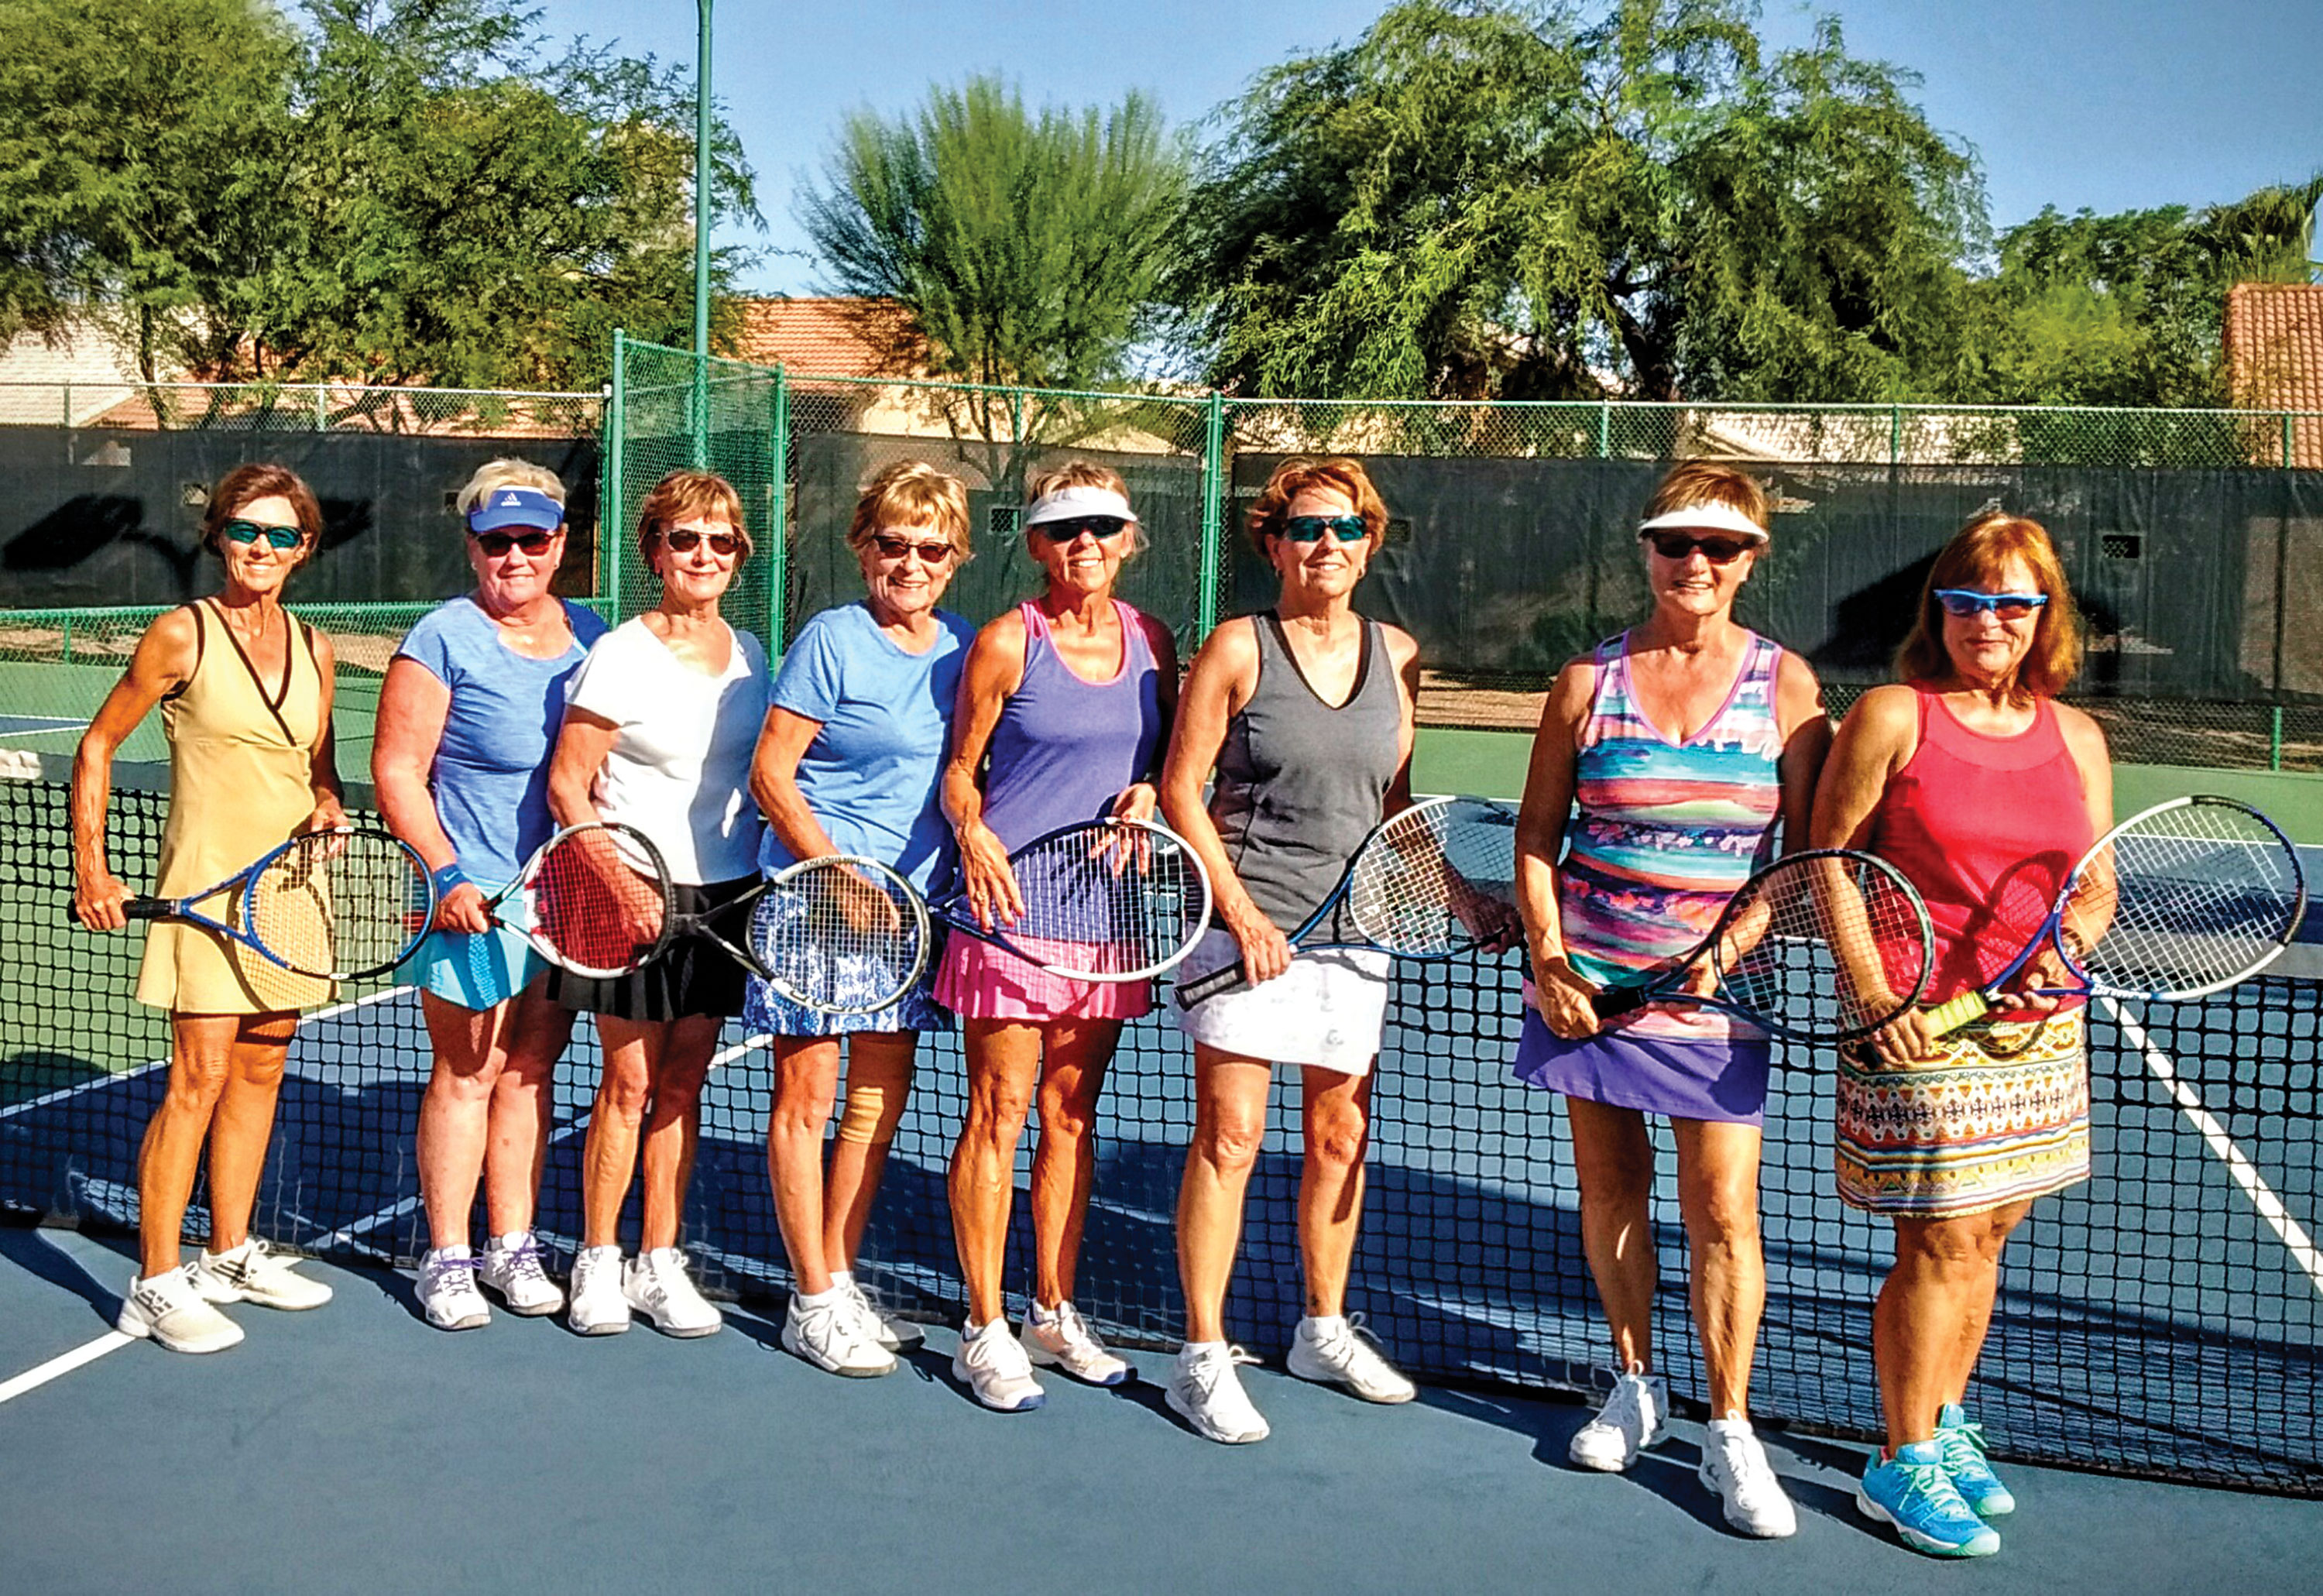 The, as yet unnamed, ladies doubles mixer tennis group